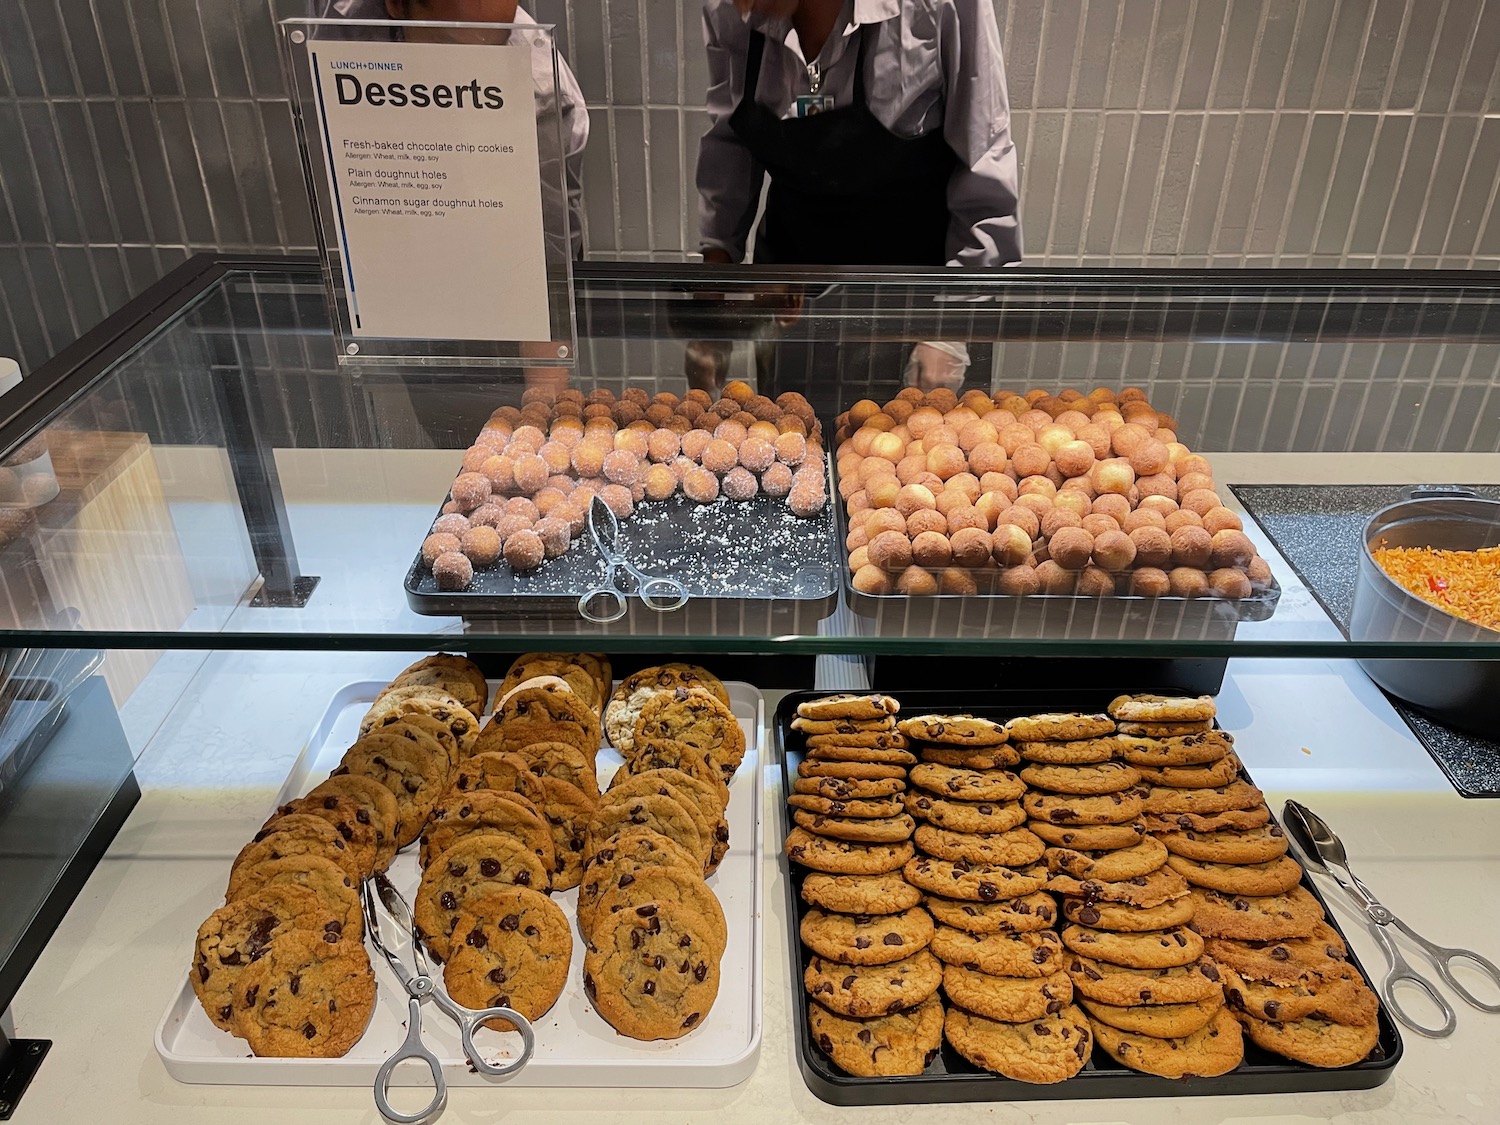 a display of cookies and desserts